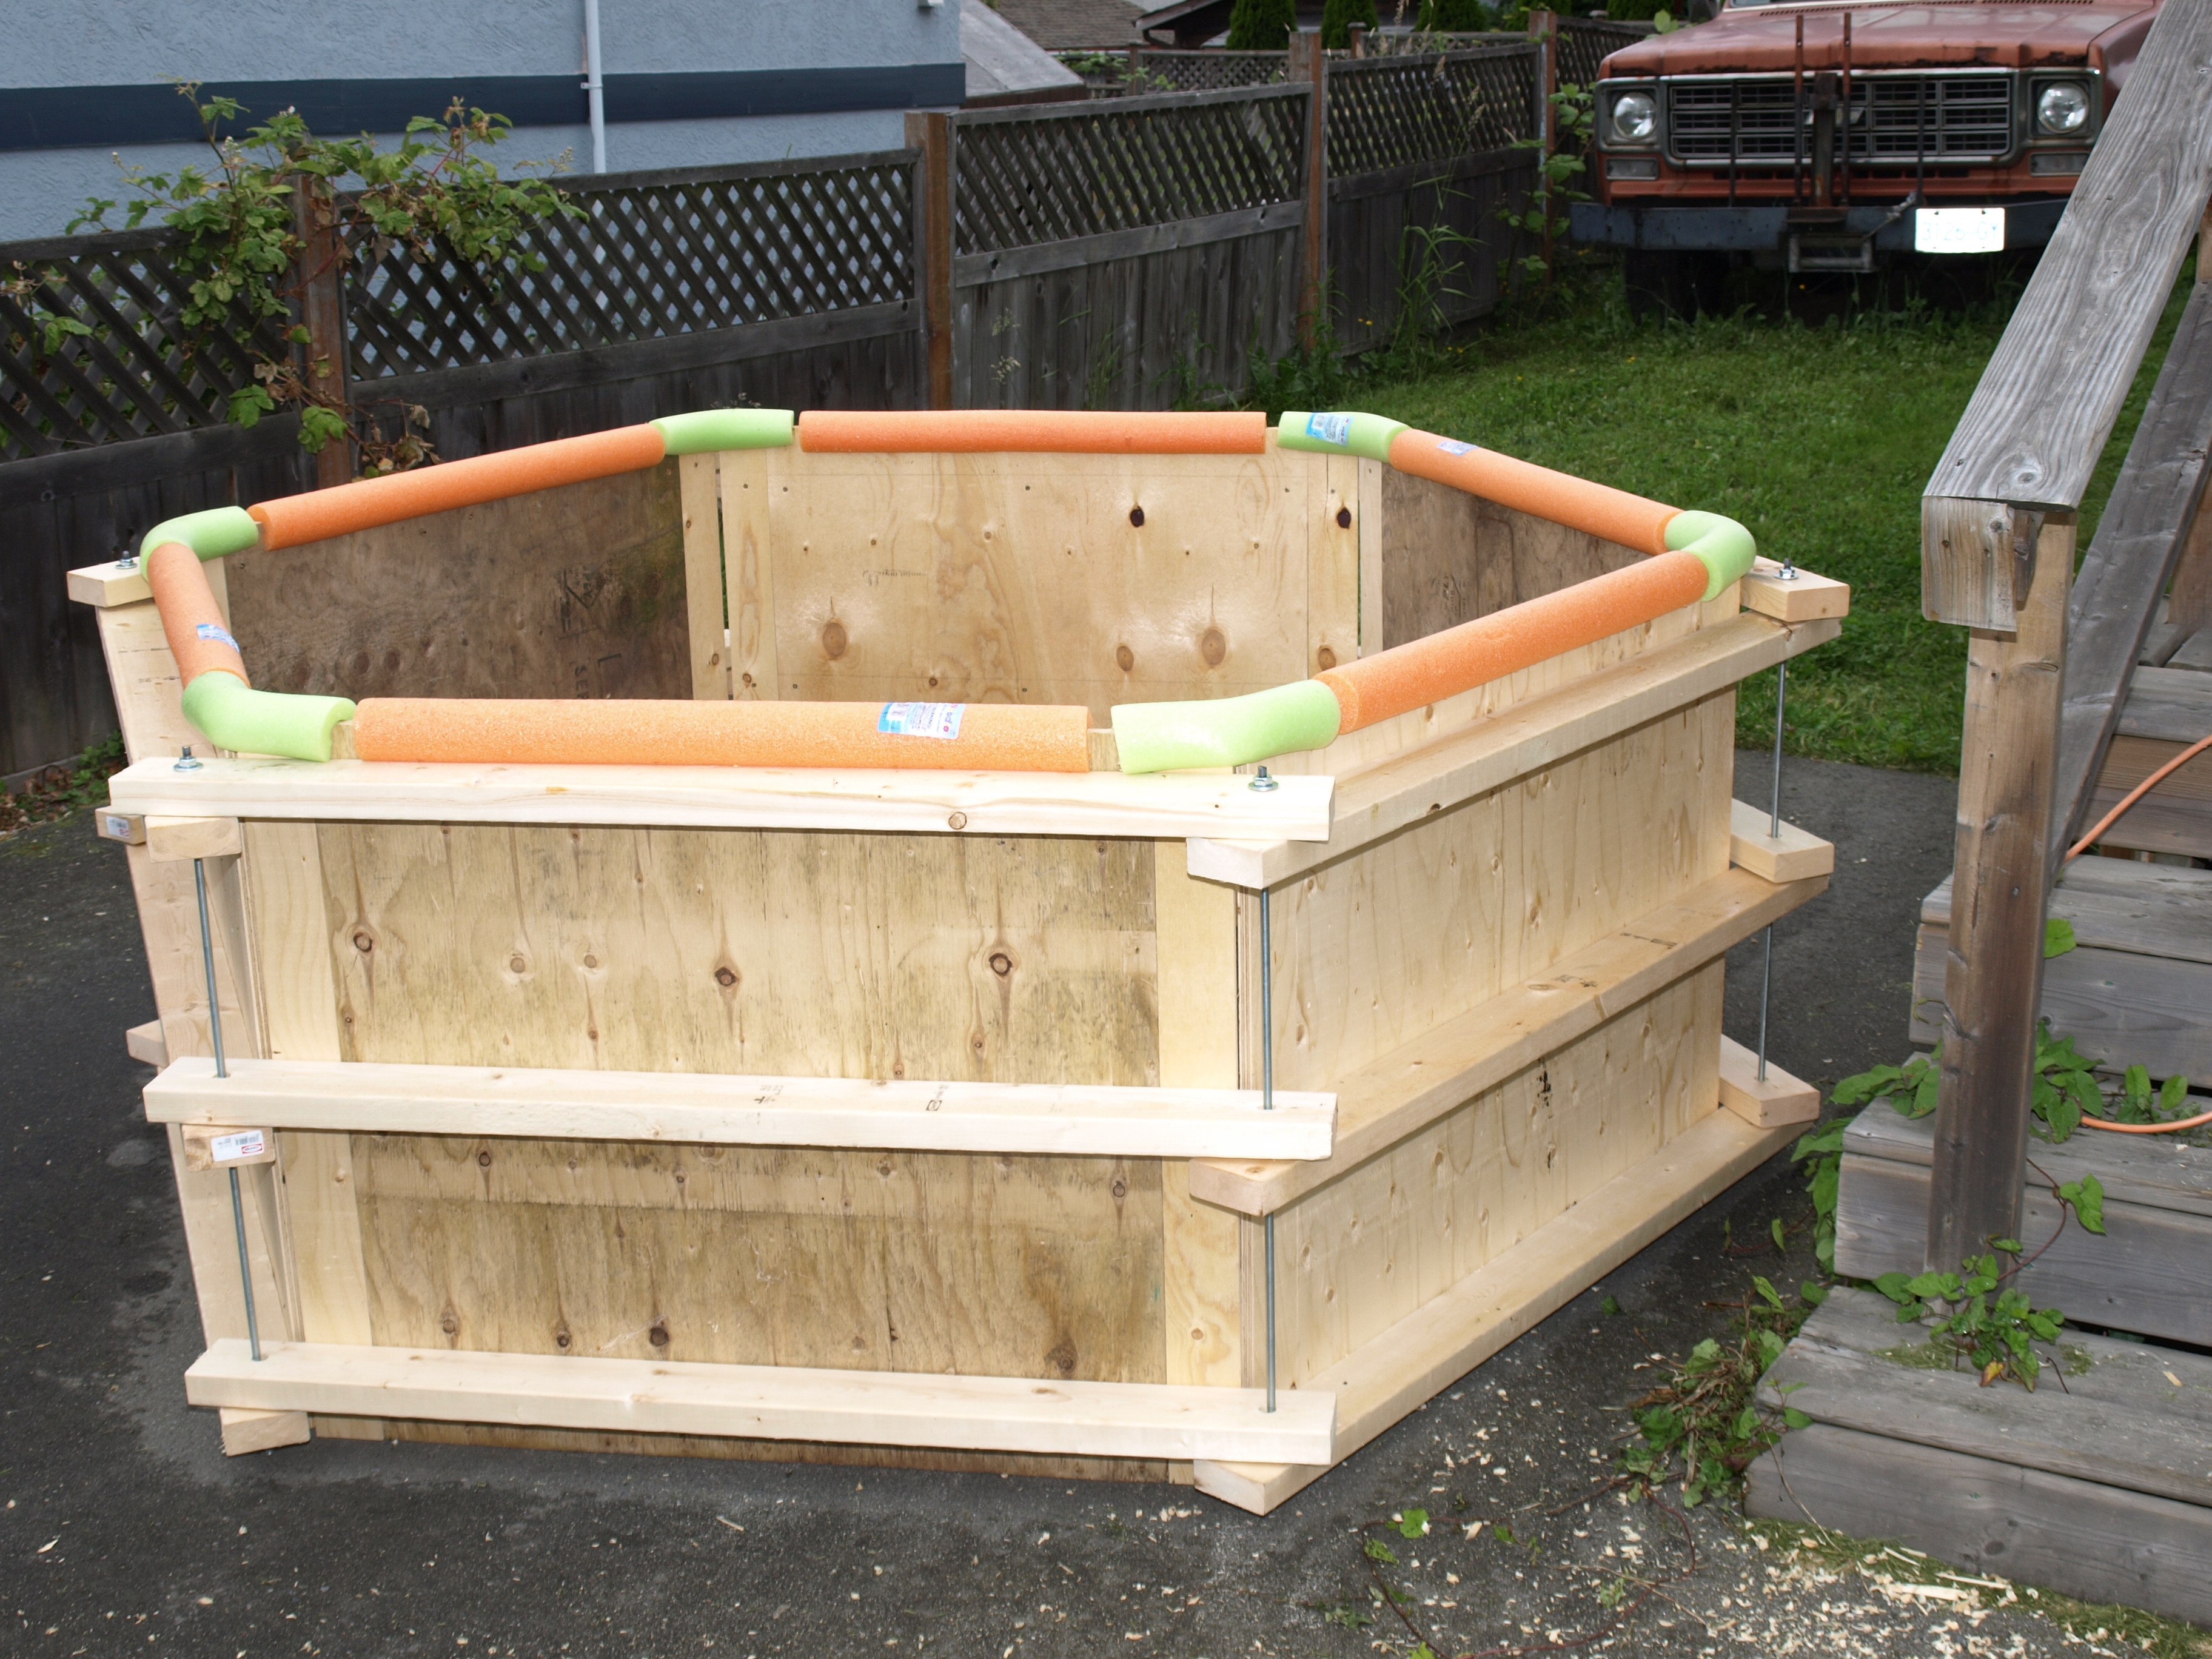 Best ideas about DIY Wooden Hot Tub
. Save or Pin I would like to build a plywood hot tub Now.